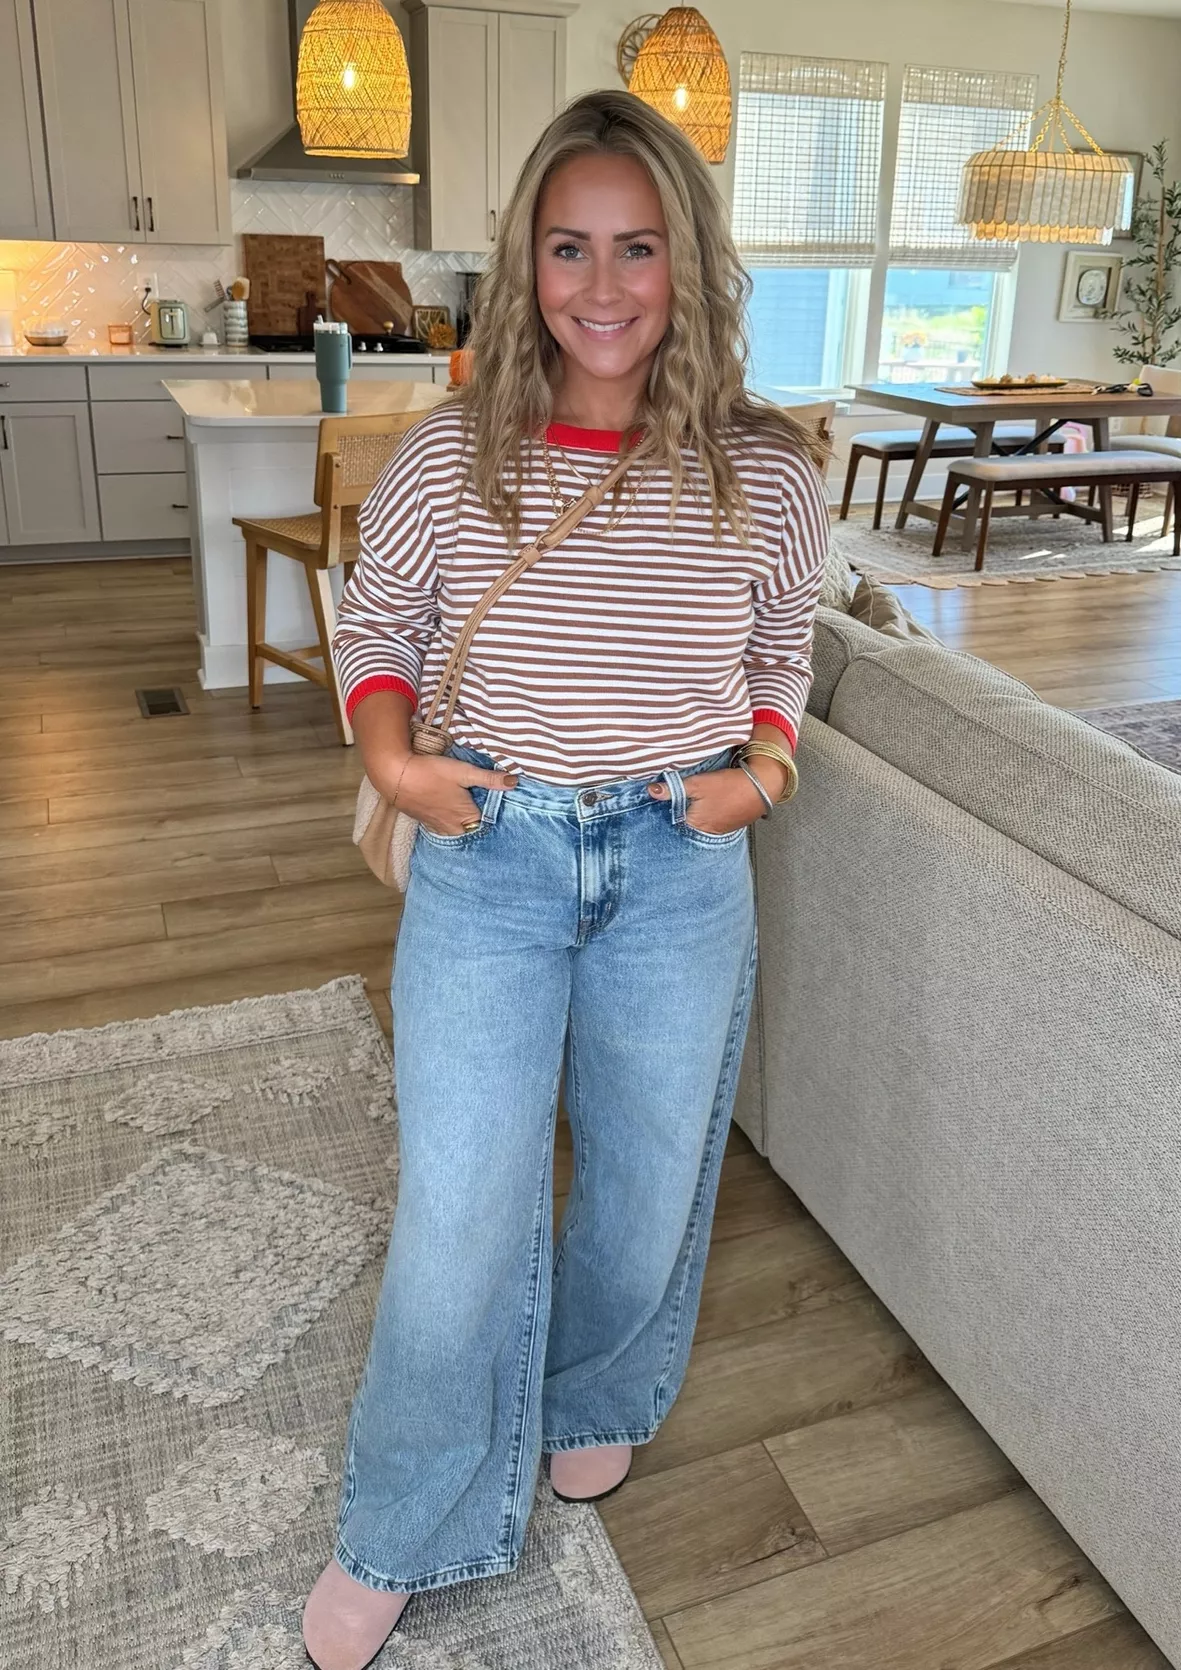 Jeans and Sweaters From Walmart - The Sister Studio